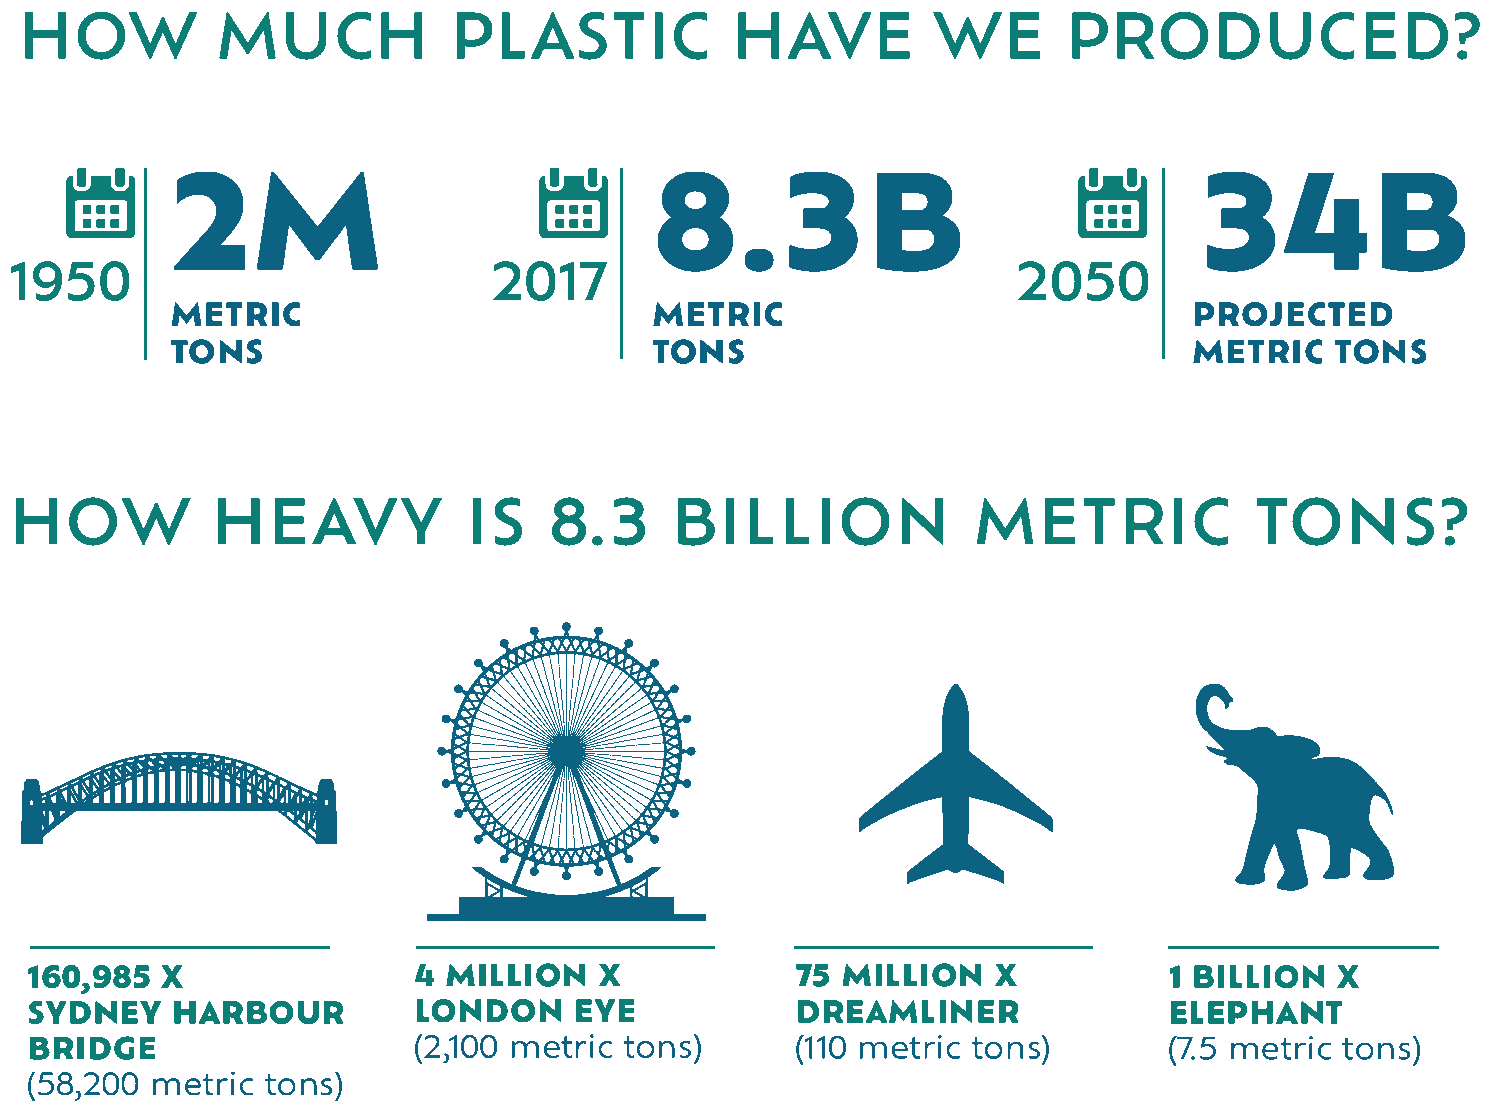 8 - 12 TONS OF MARINE PLASTIC POLLUTION PER YEAR